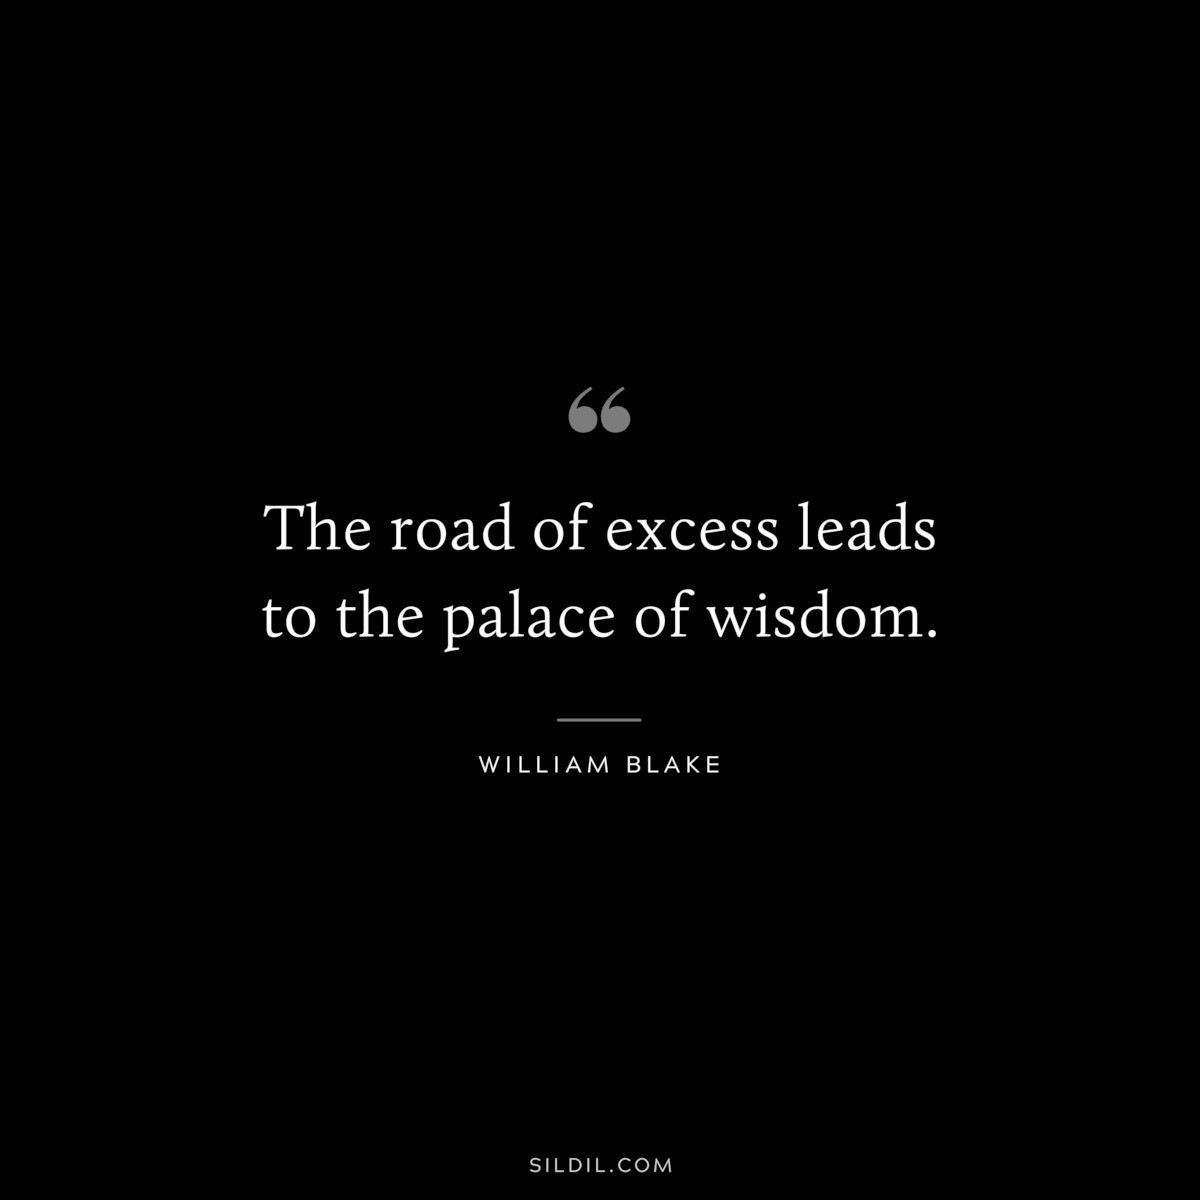 The road of excess leads to the palace of wisdom. ― William Blake